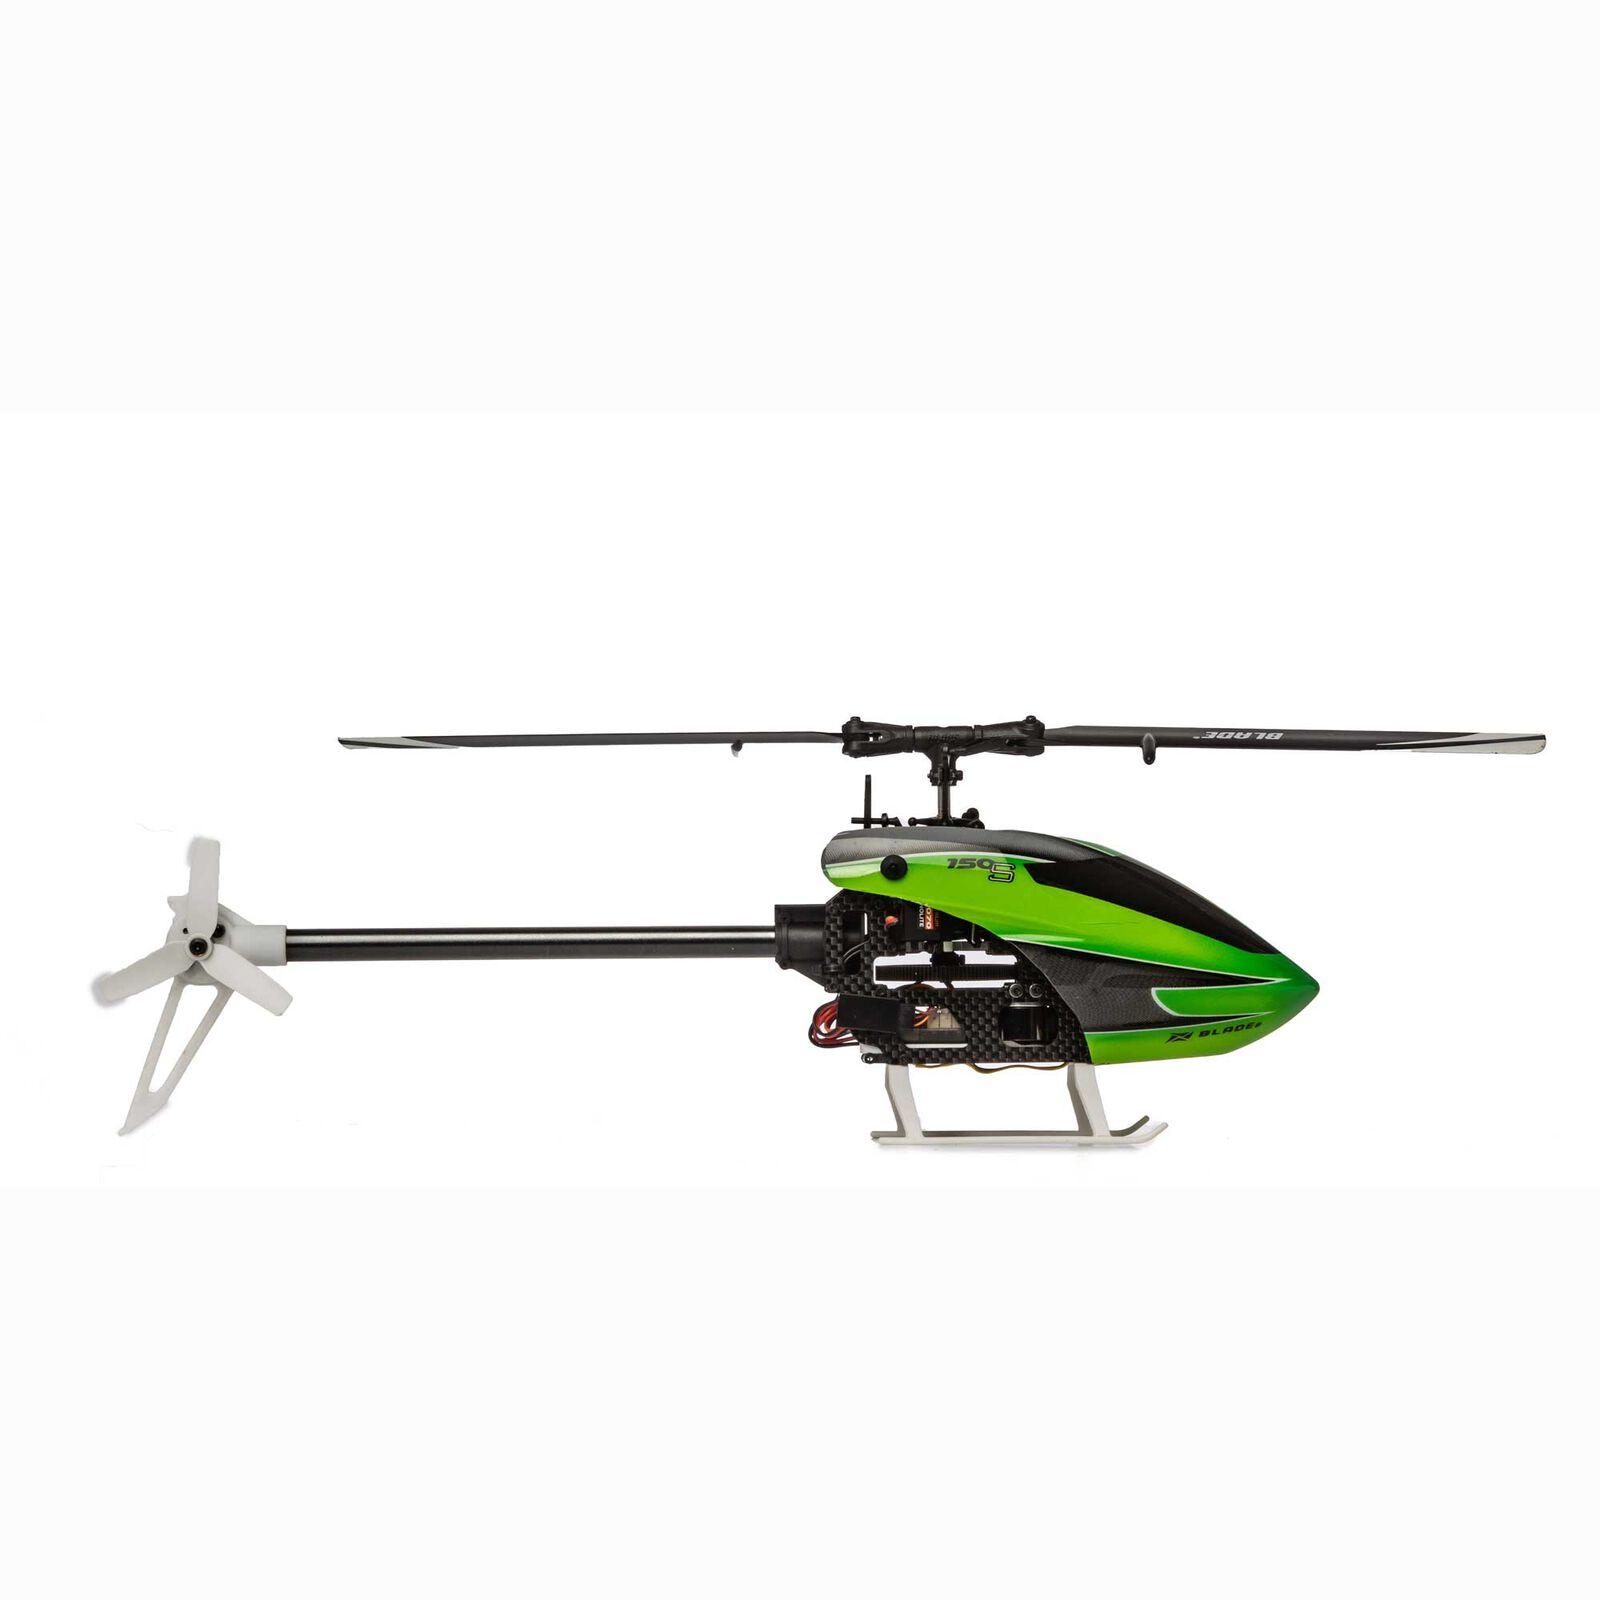 150 S Smart Bnf Basic With As3X And Safe: Flight Modes for All Skill Levels on the 150 S Smart BNF Basic Helicopter